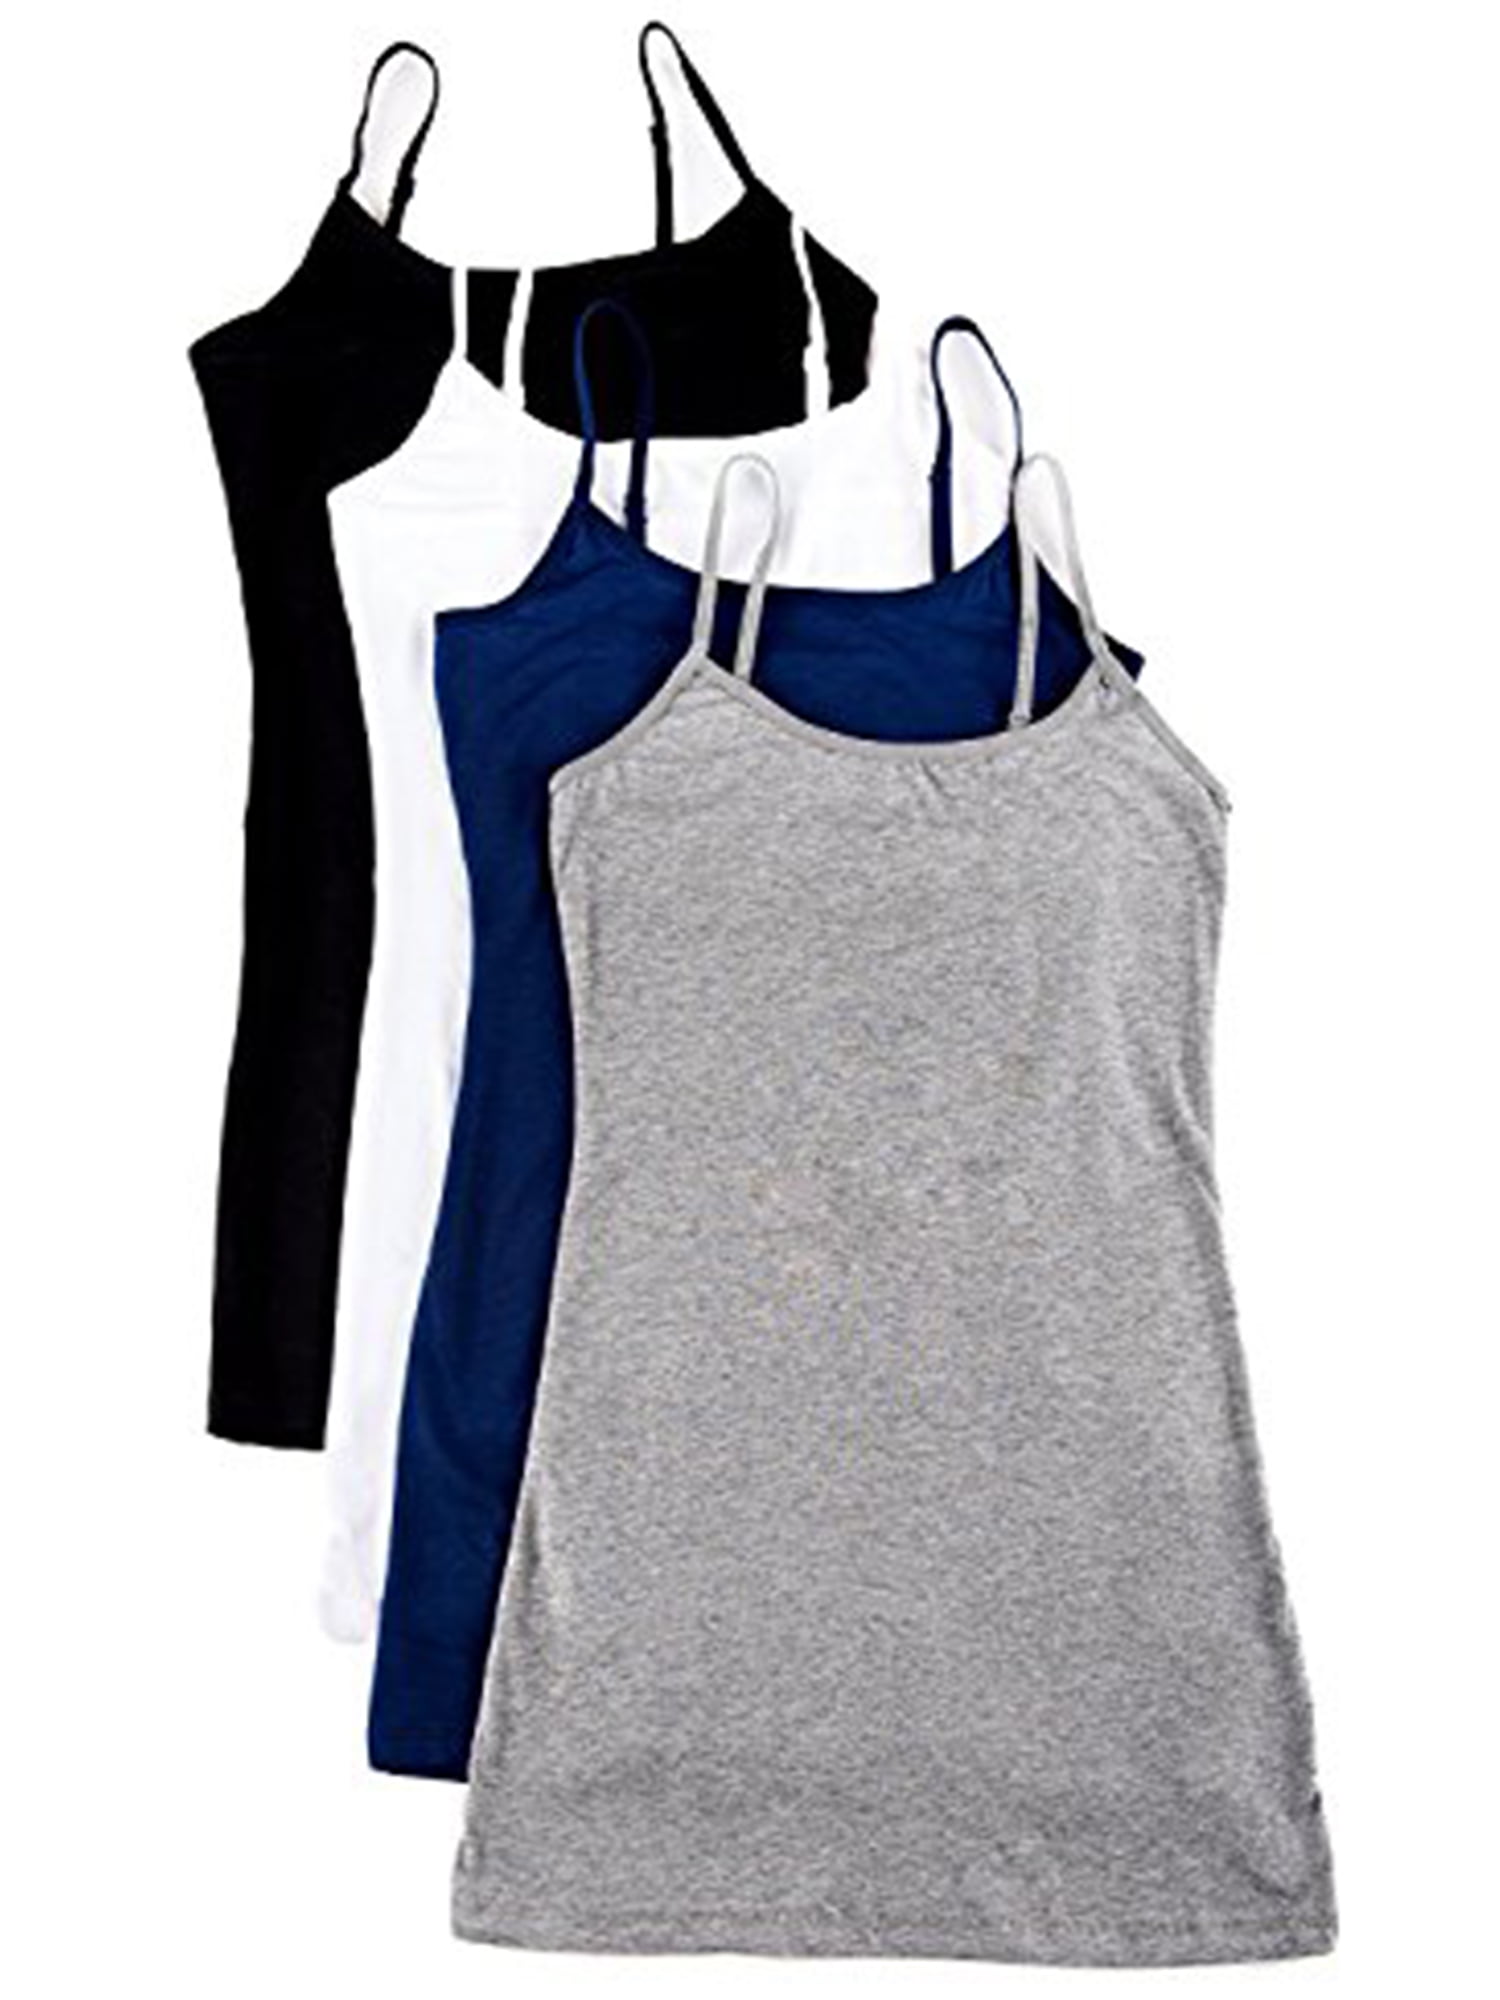 Essential Basic Women Value Pack Long Camisole Cami - Black, H